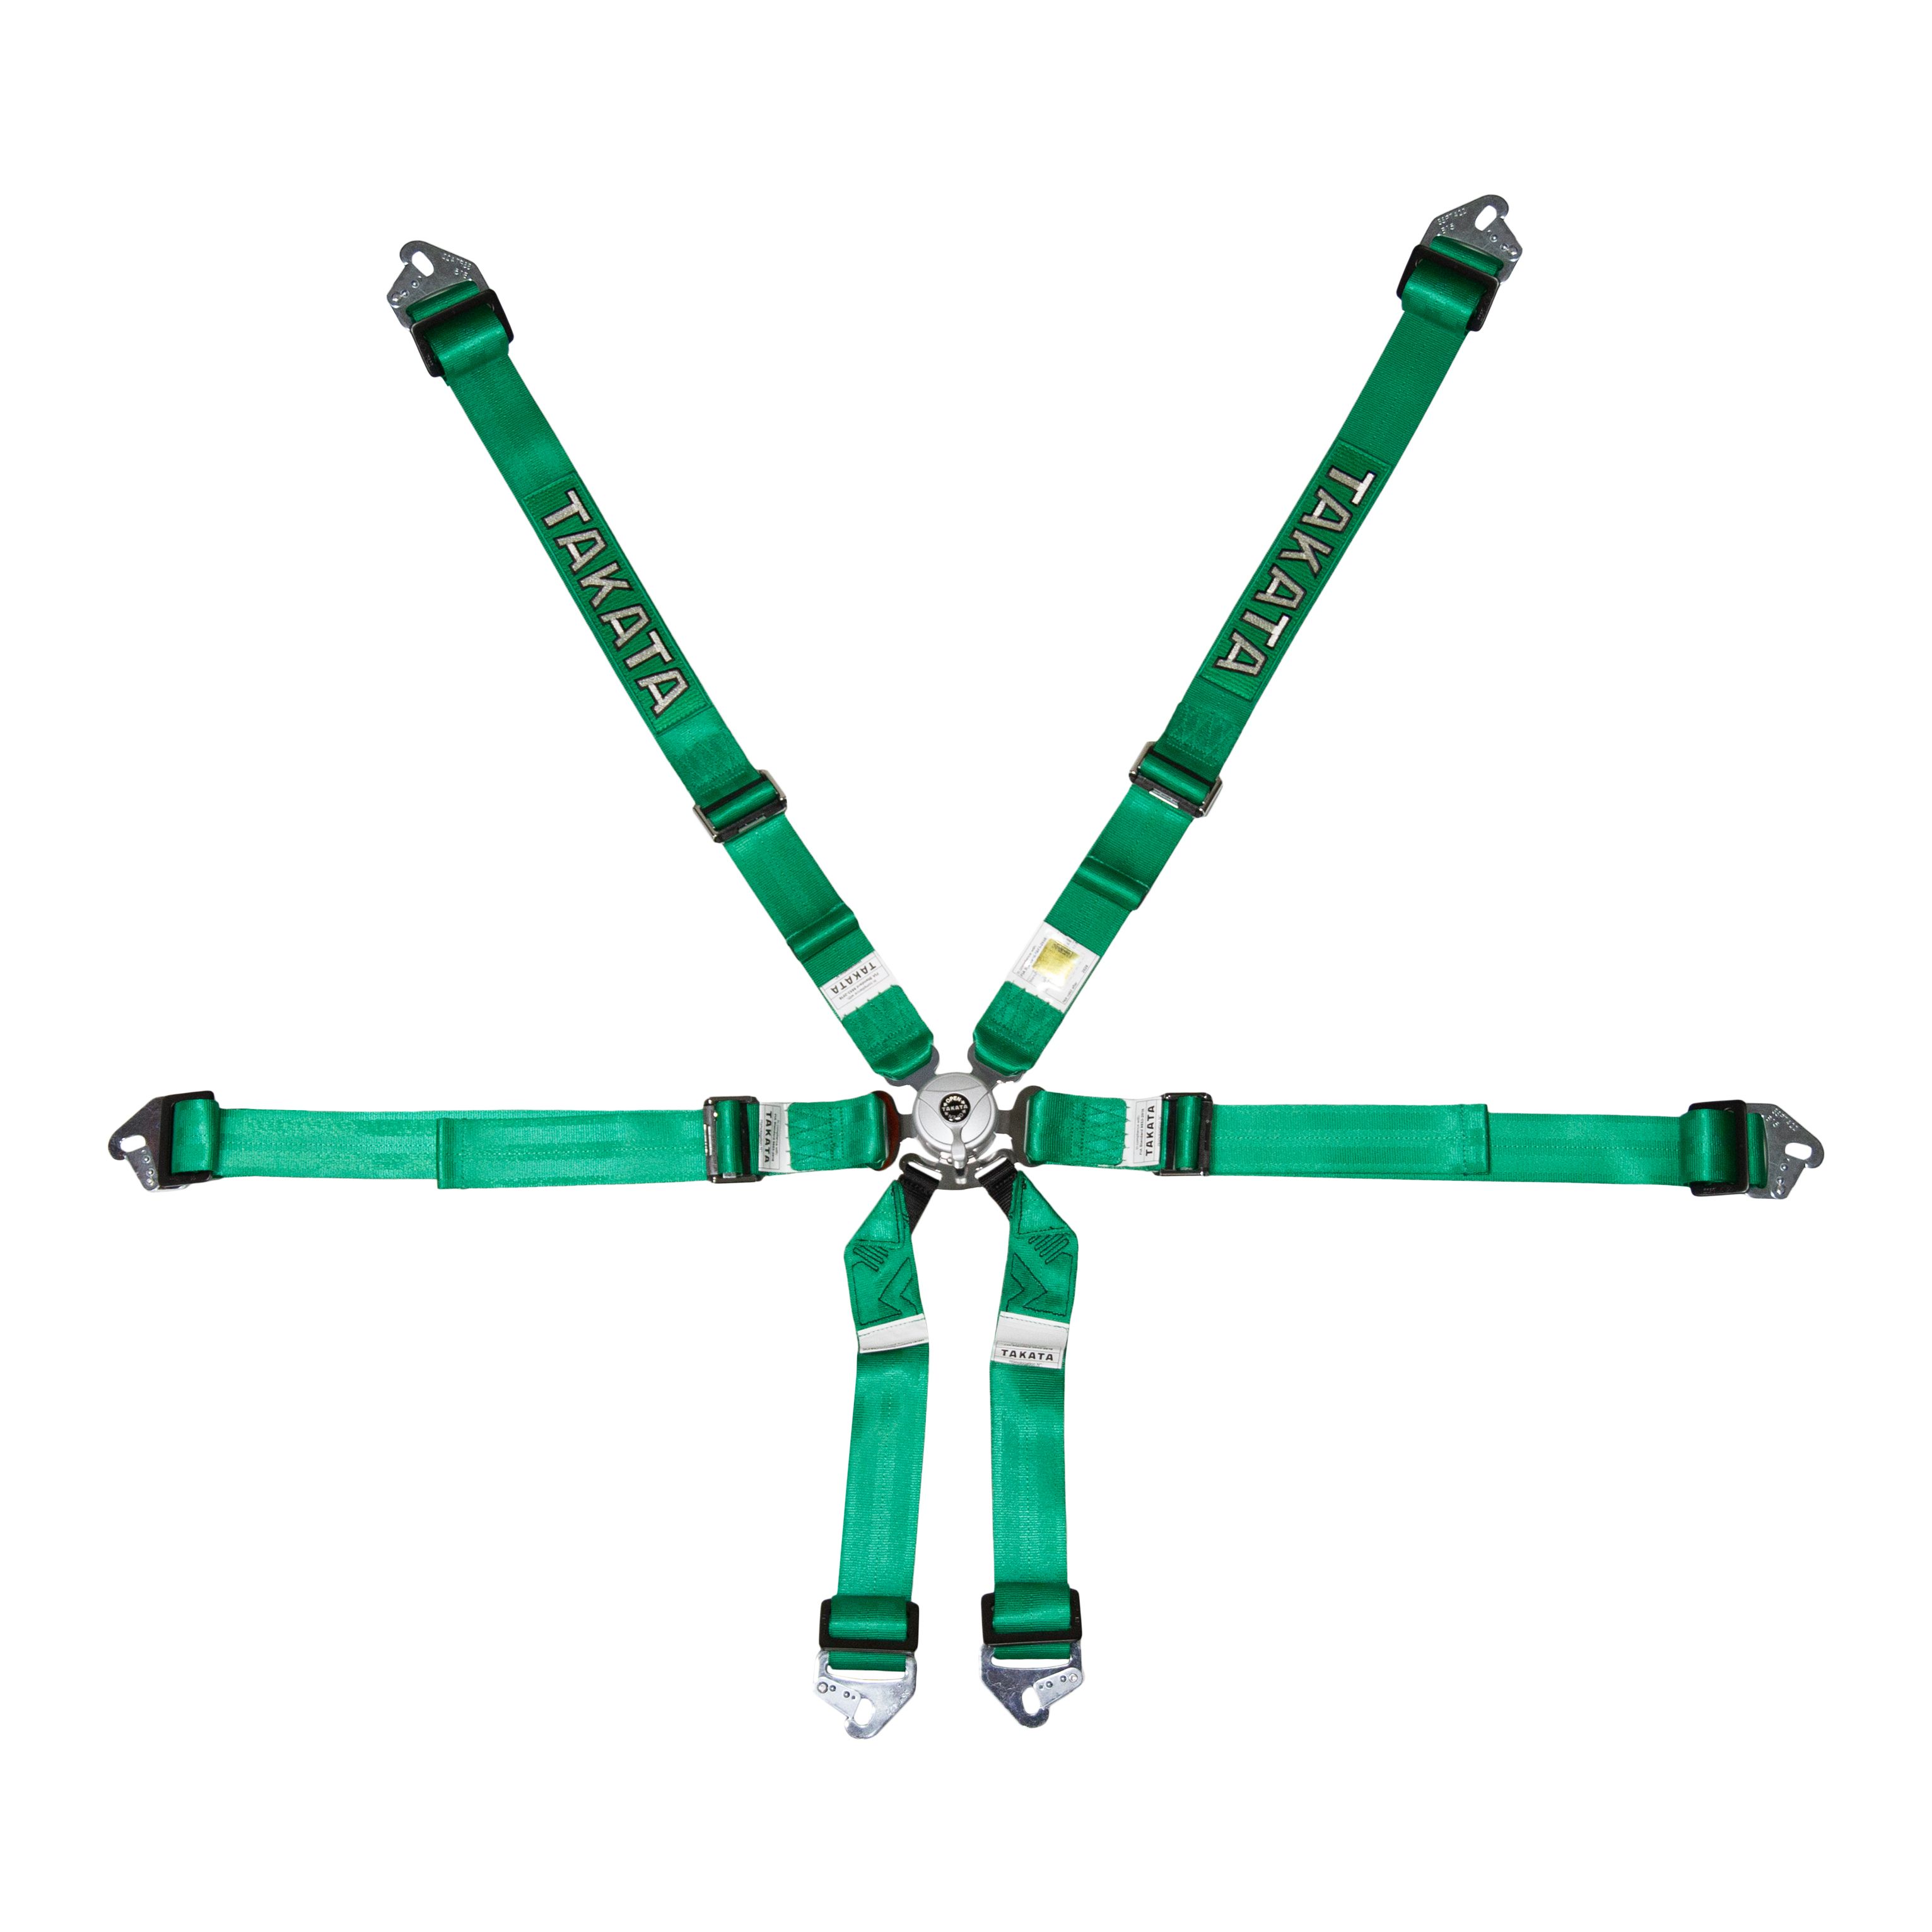 Takata Race Series 6 Points Harness, Race 2x2 Exp. Date 2029 - Green